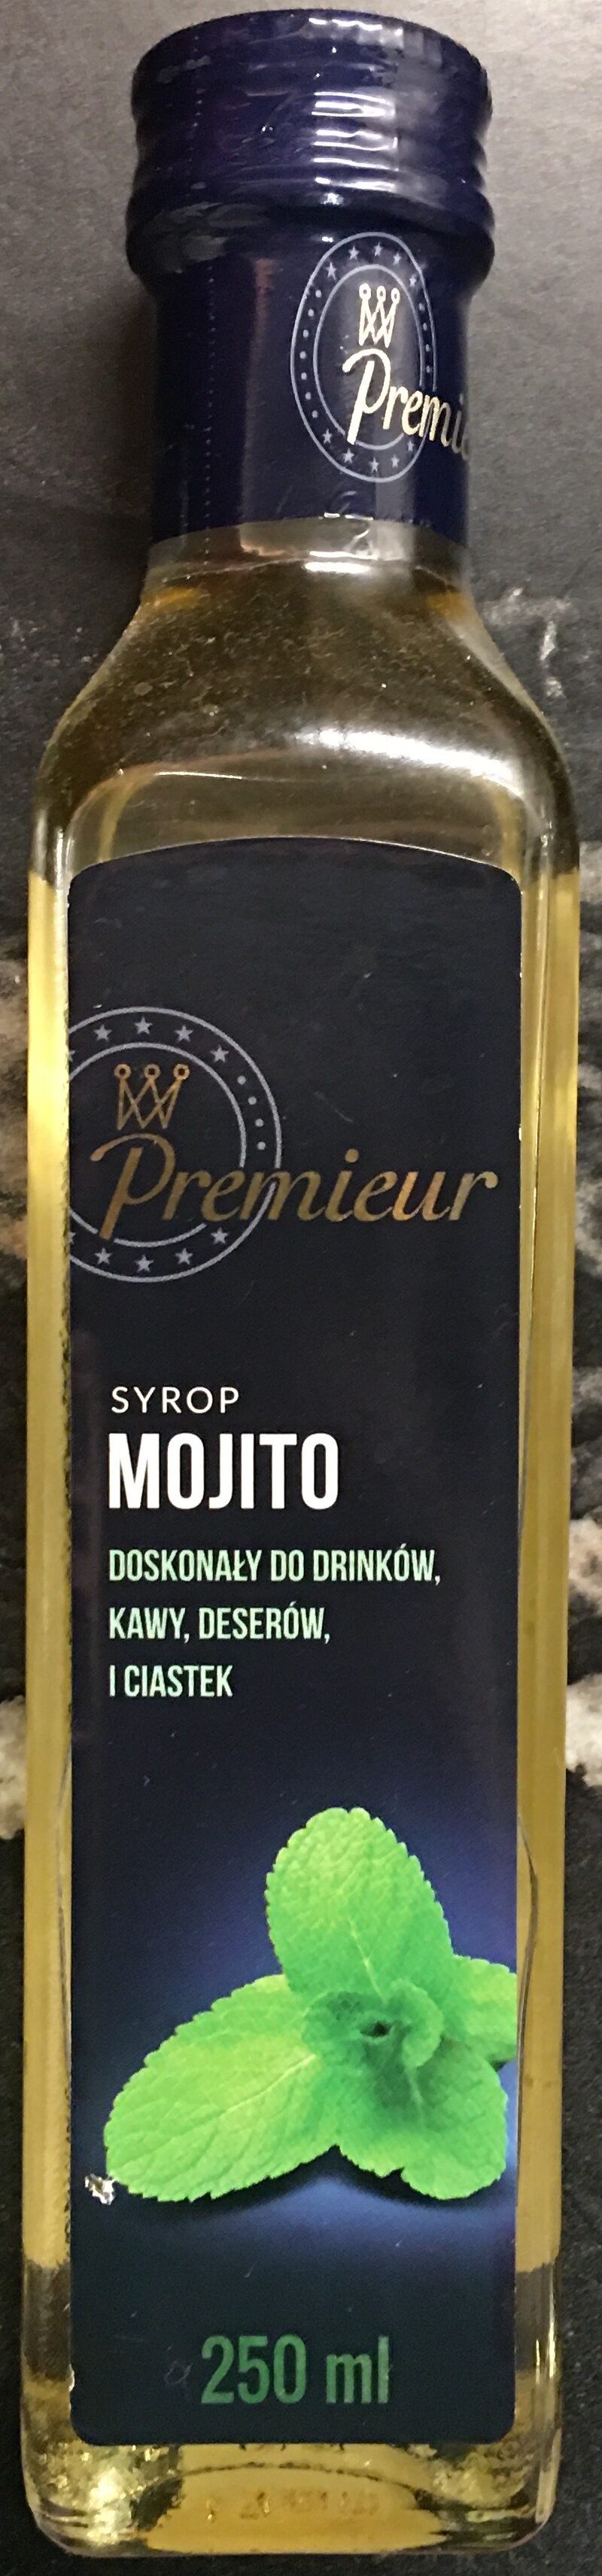 Syrop Mojito - Product - pl